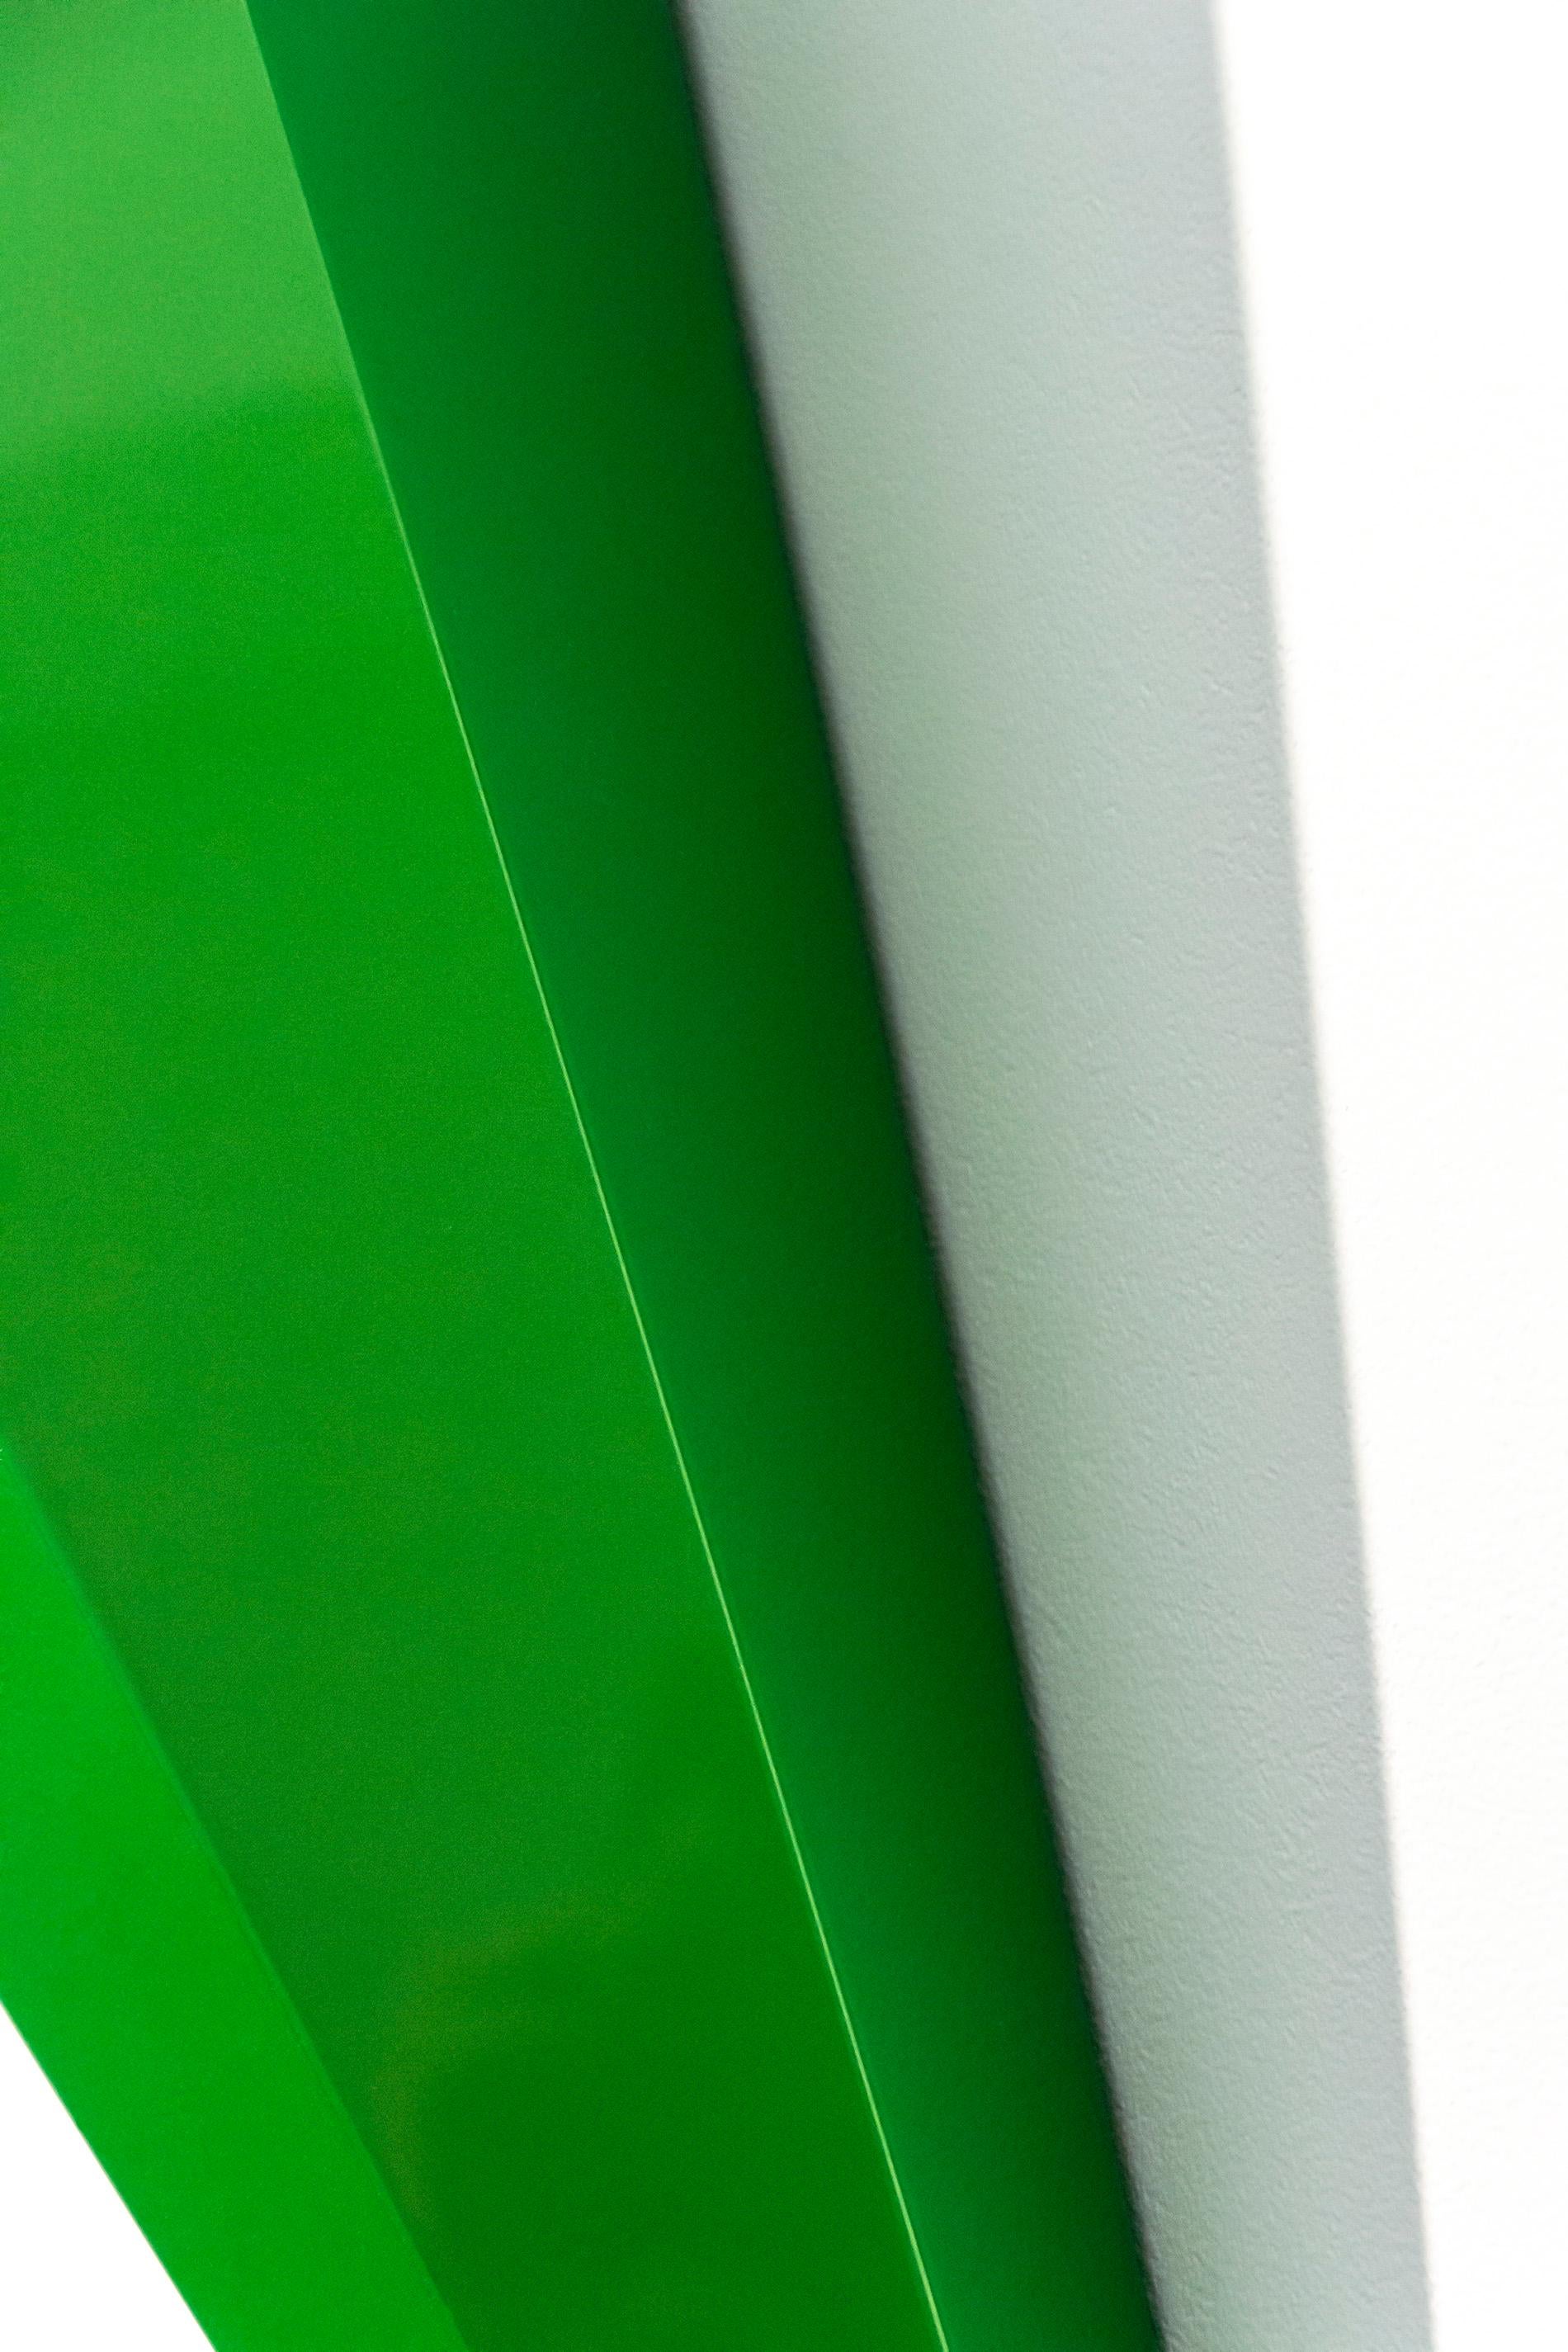 On Point - bright, glossy, green, smooth surfaced, abstract, wall sculpture For Sale 3